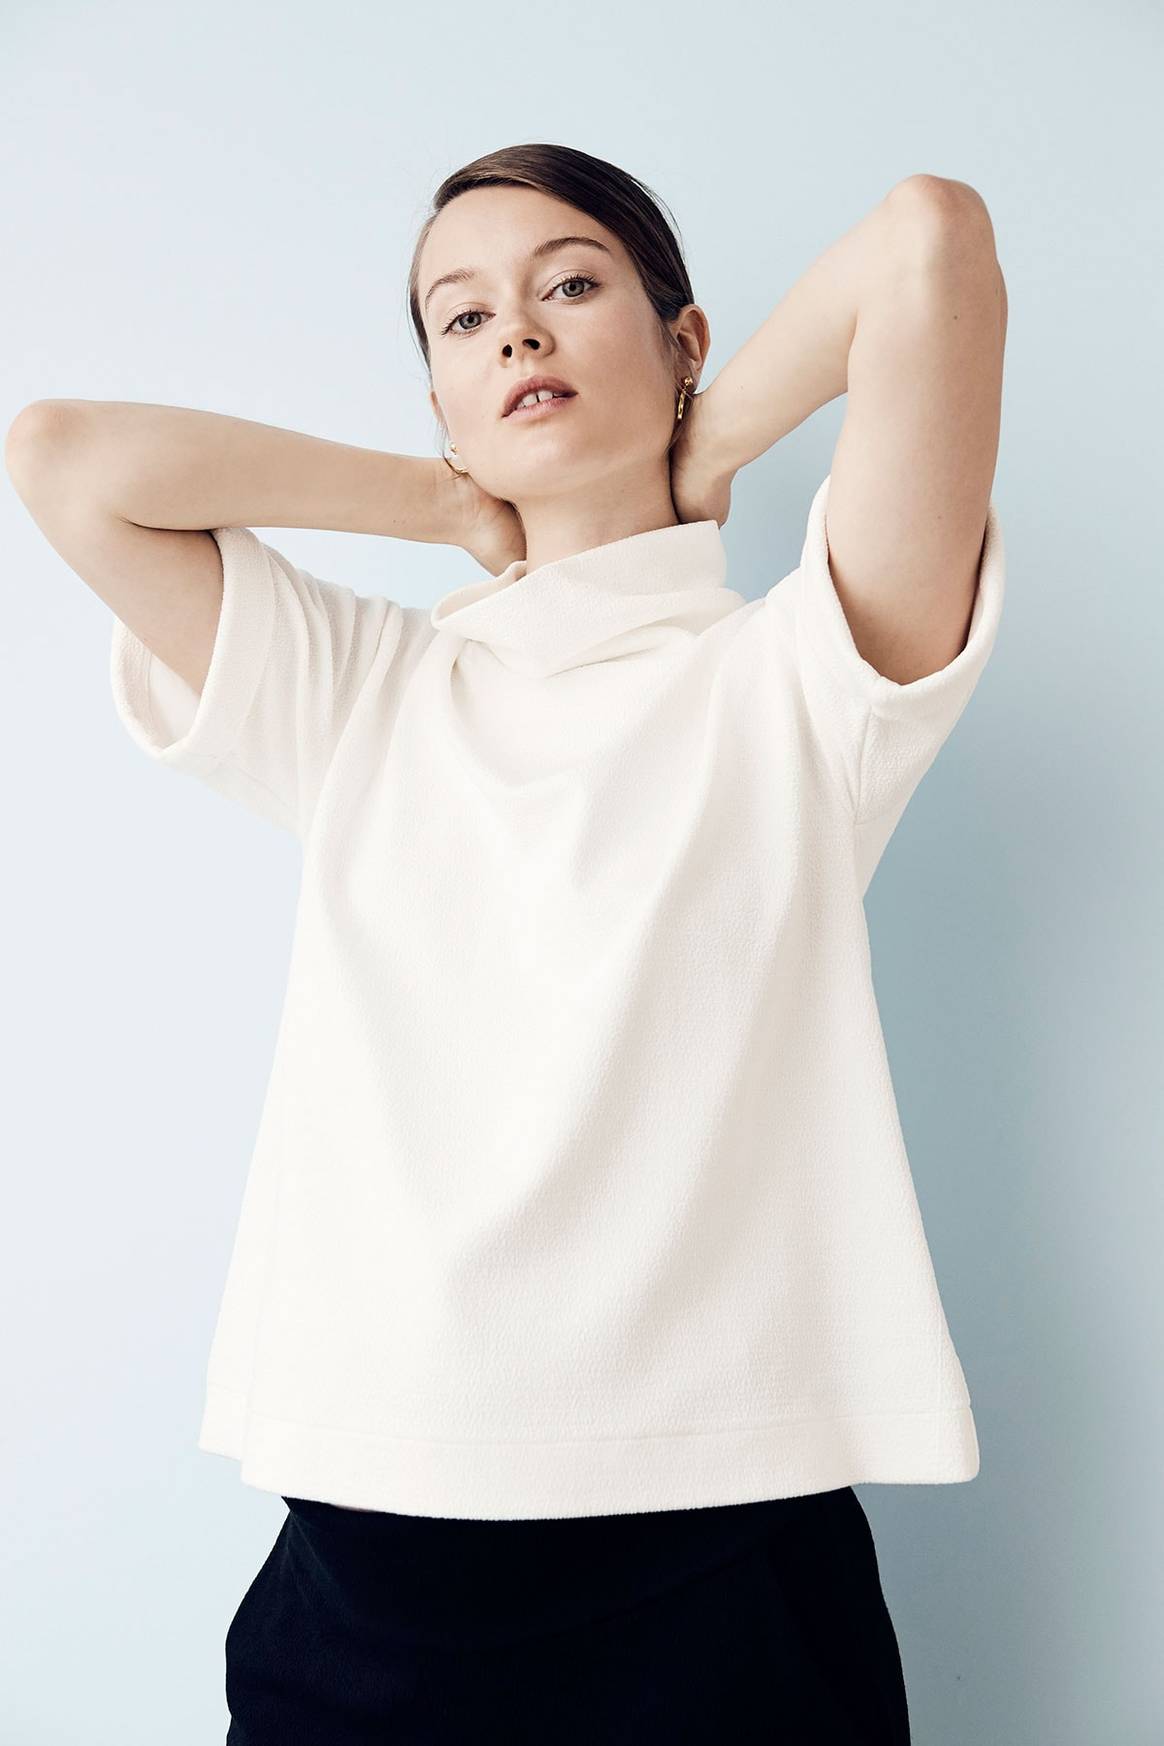 J.Crew expands to maternity with Hatch